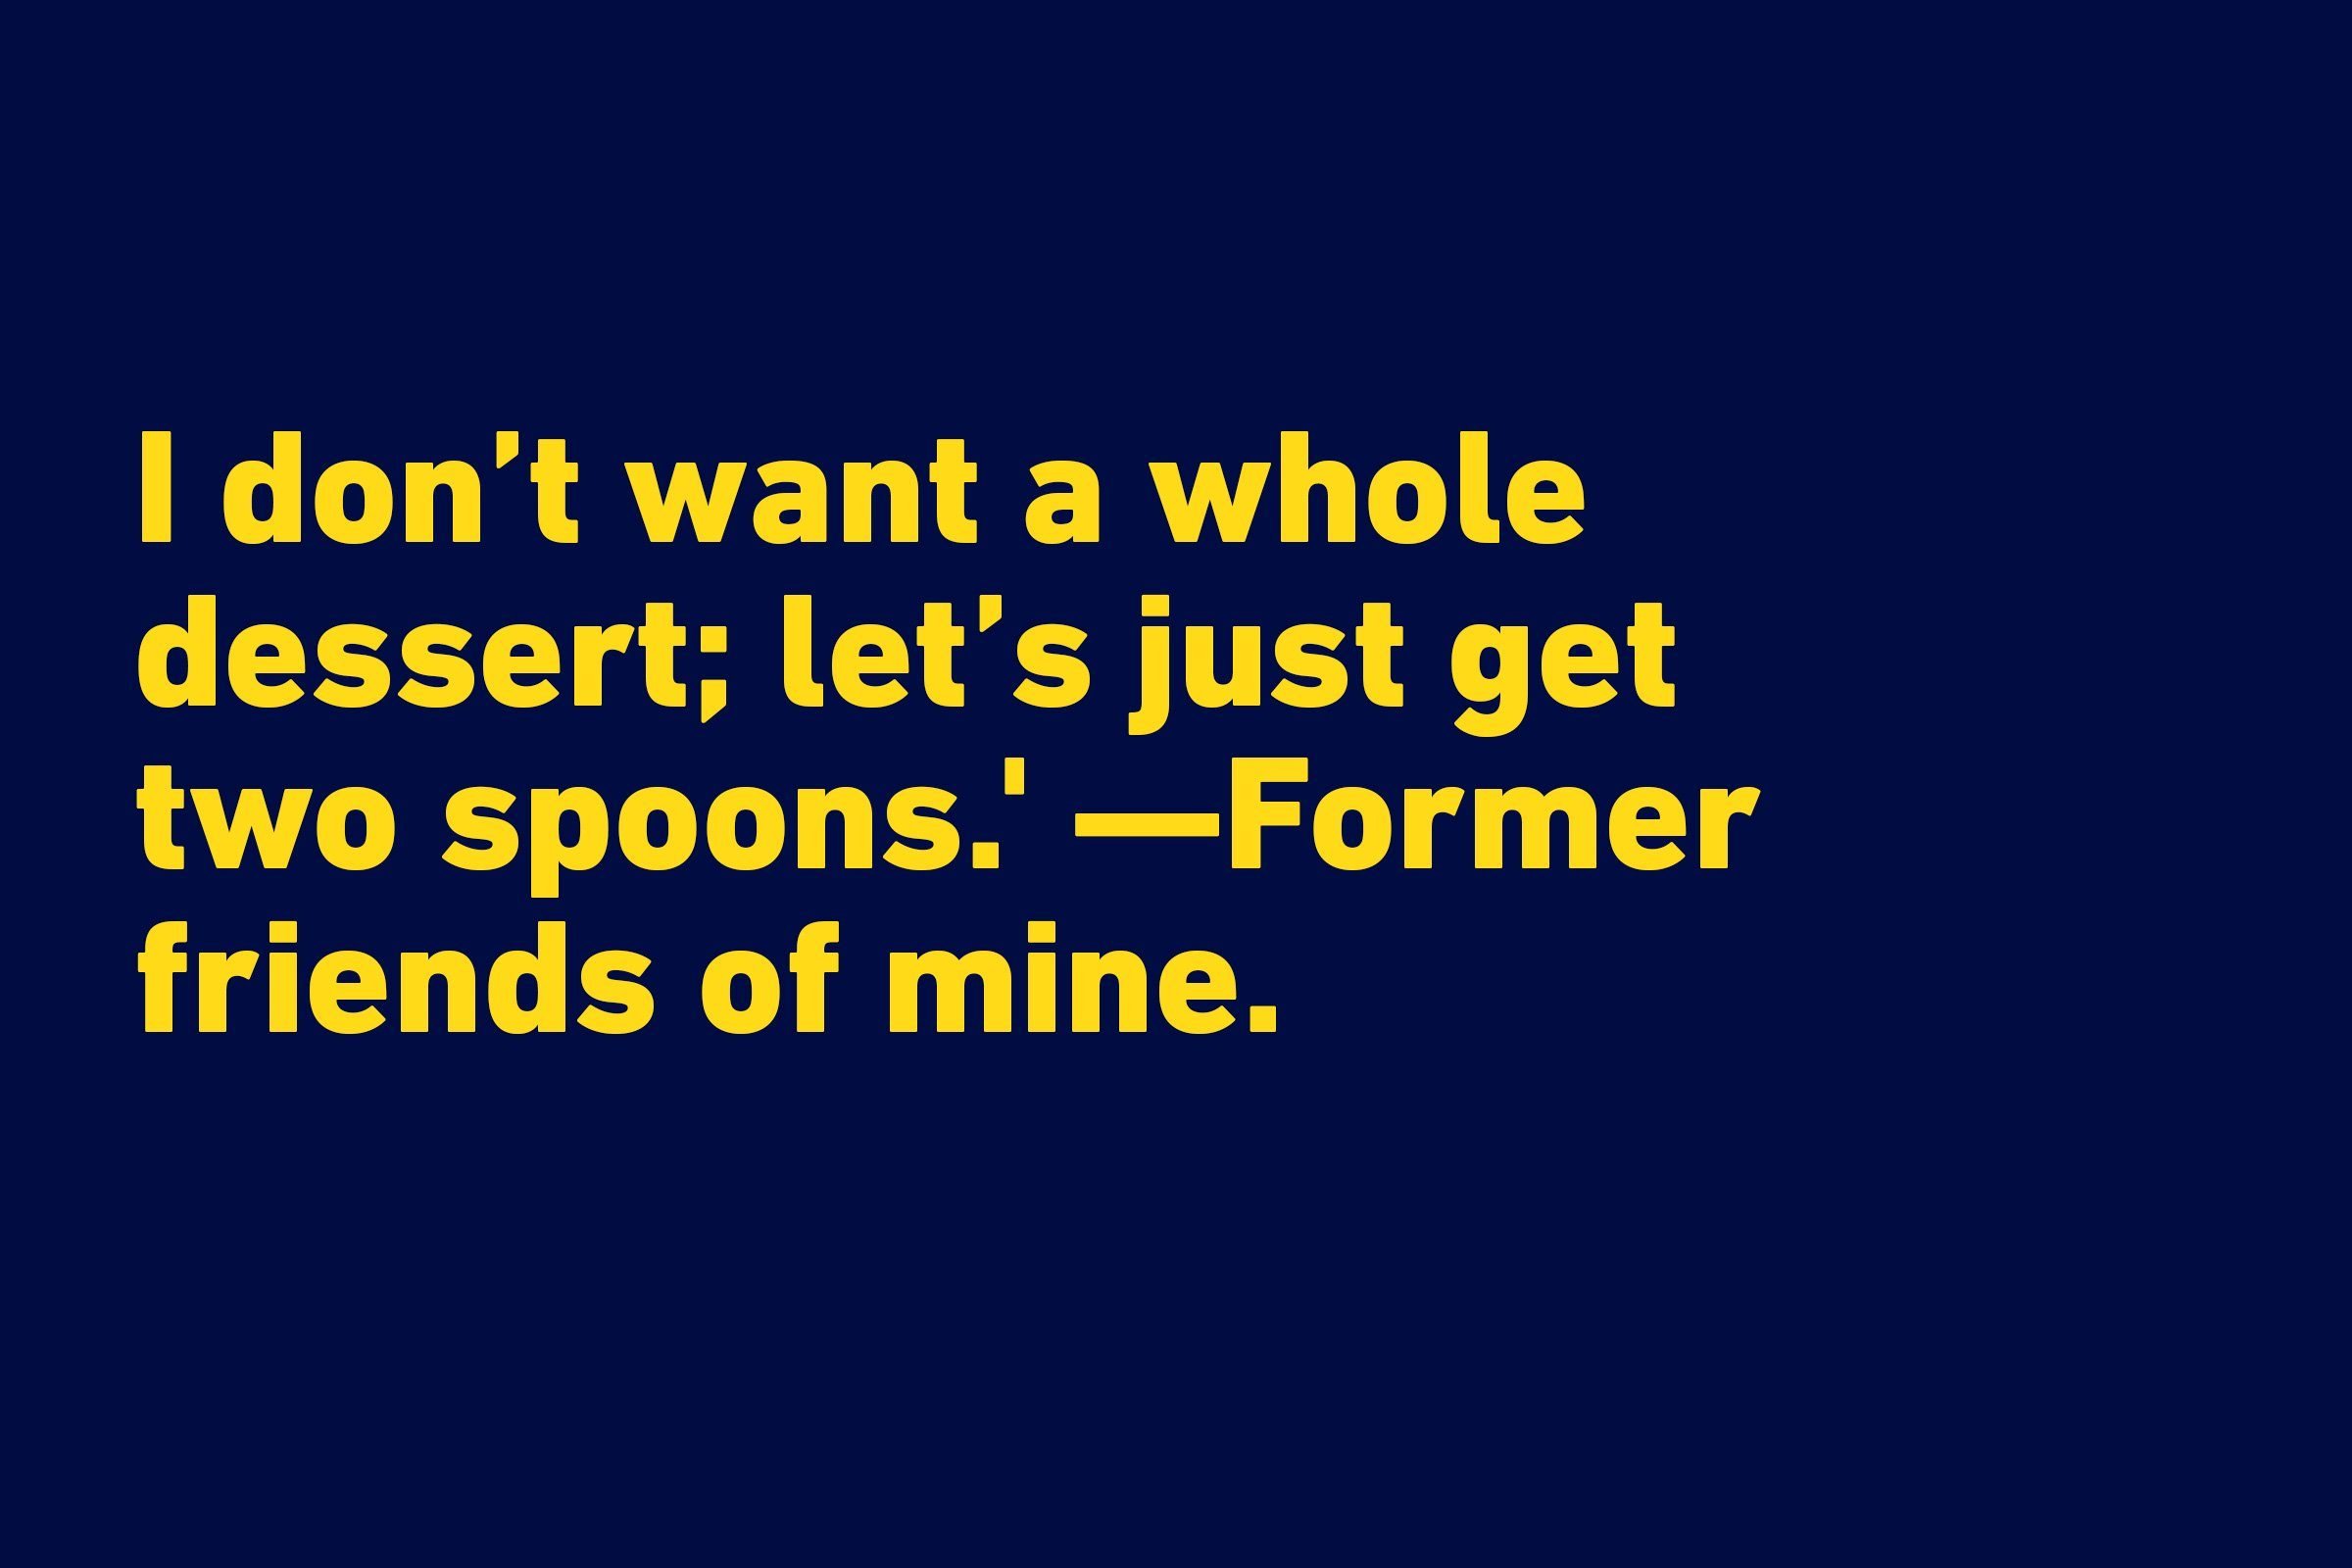 Funniest quotes of all time - dessert deal-breaker